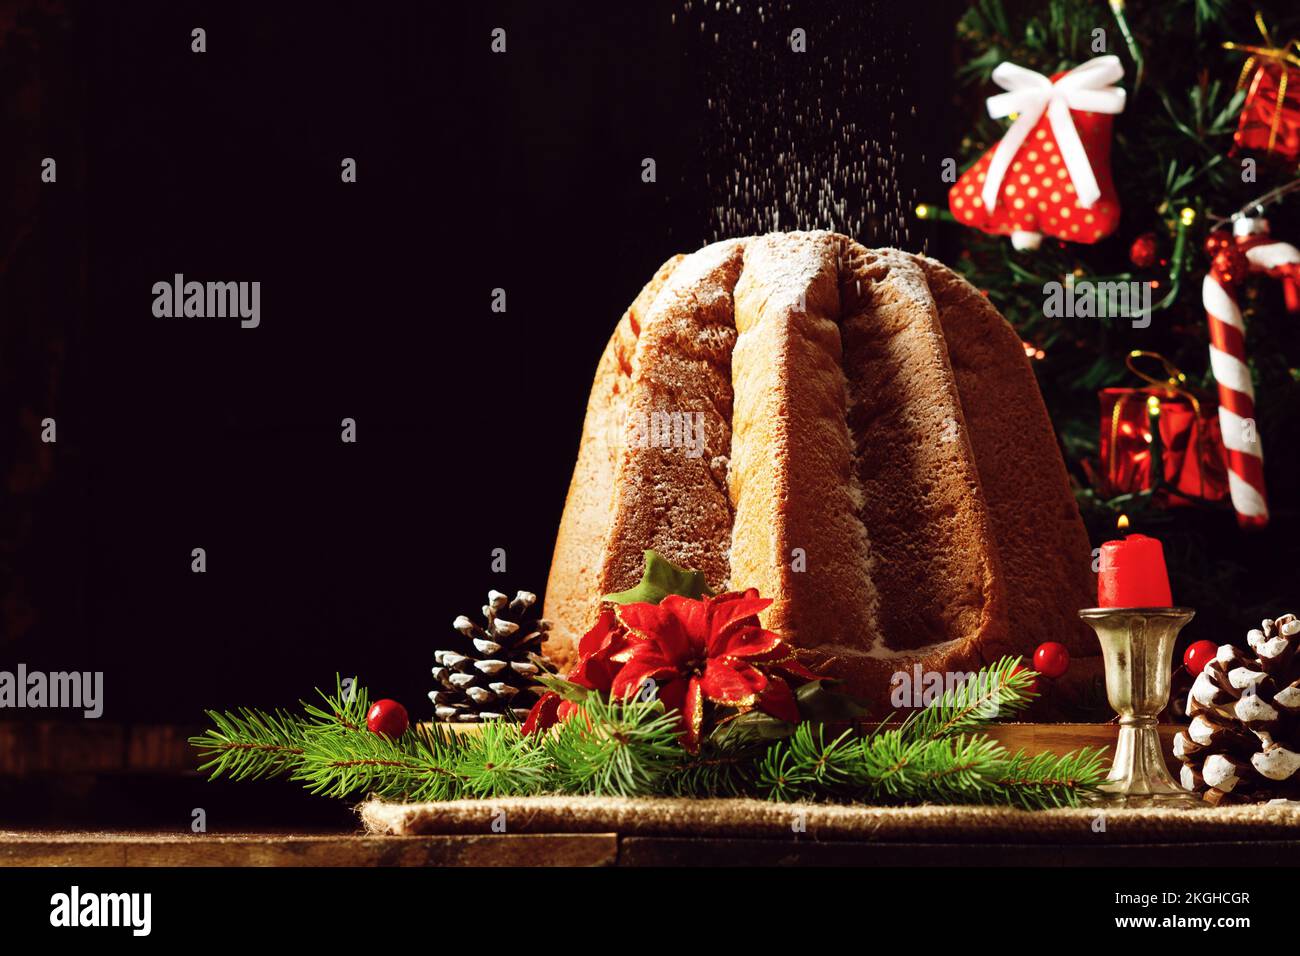 https://c8.alamy.com/comp/2KGHCGR/traditional-italian-christmas-sweet-bread-pandoro-with-vanilla-scented-icing-sugar-and-christmas-decorations-on-wooden-background-copy-space-2KGHCGR.jpg